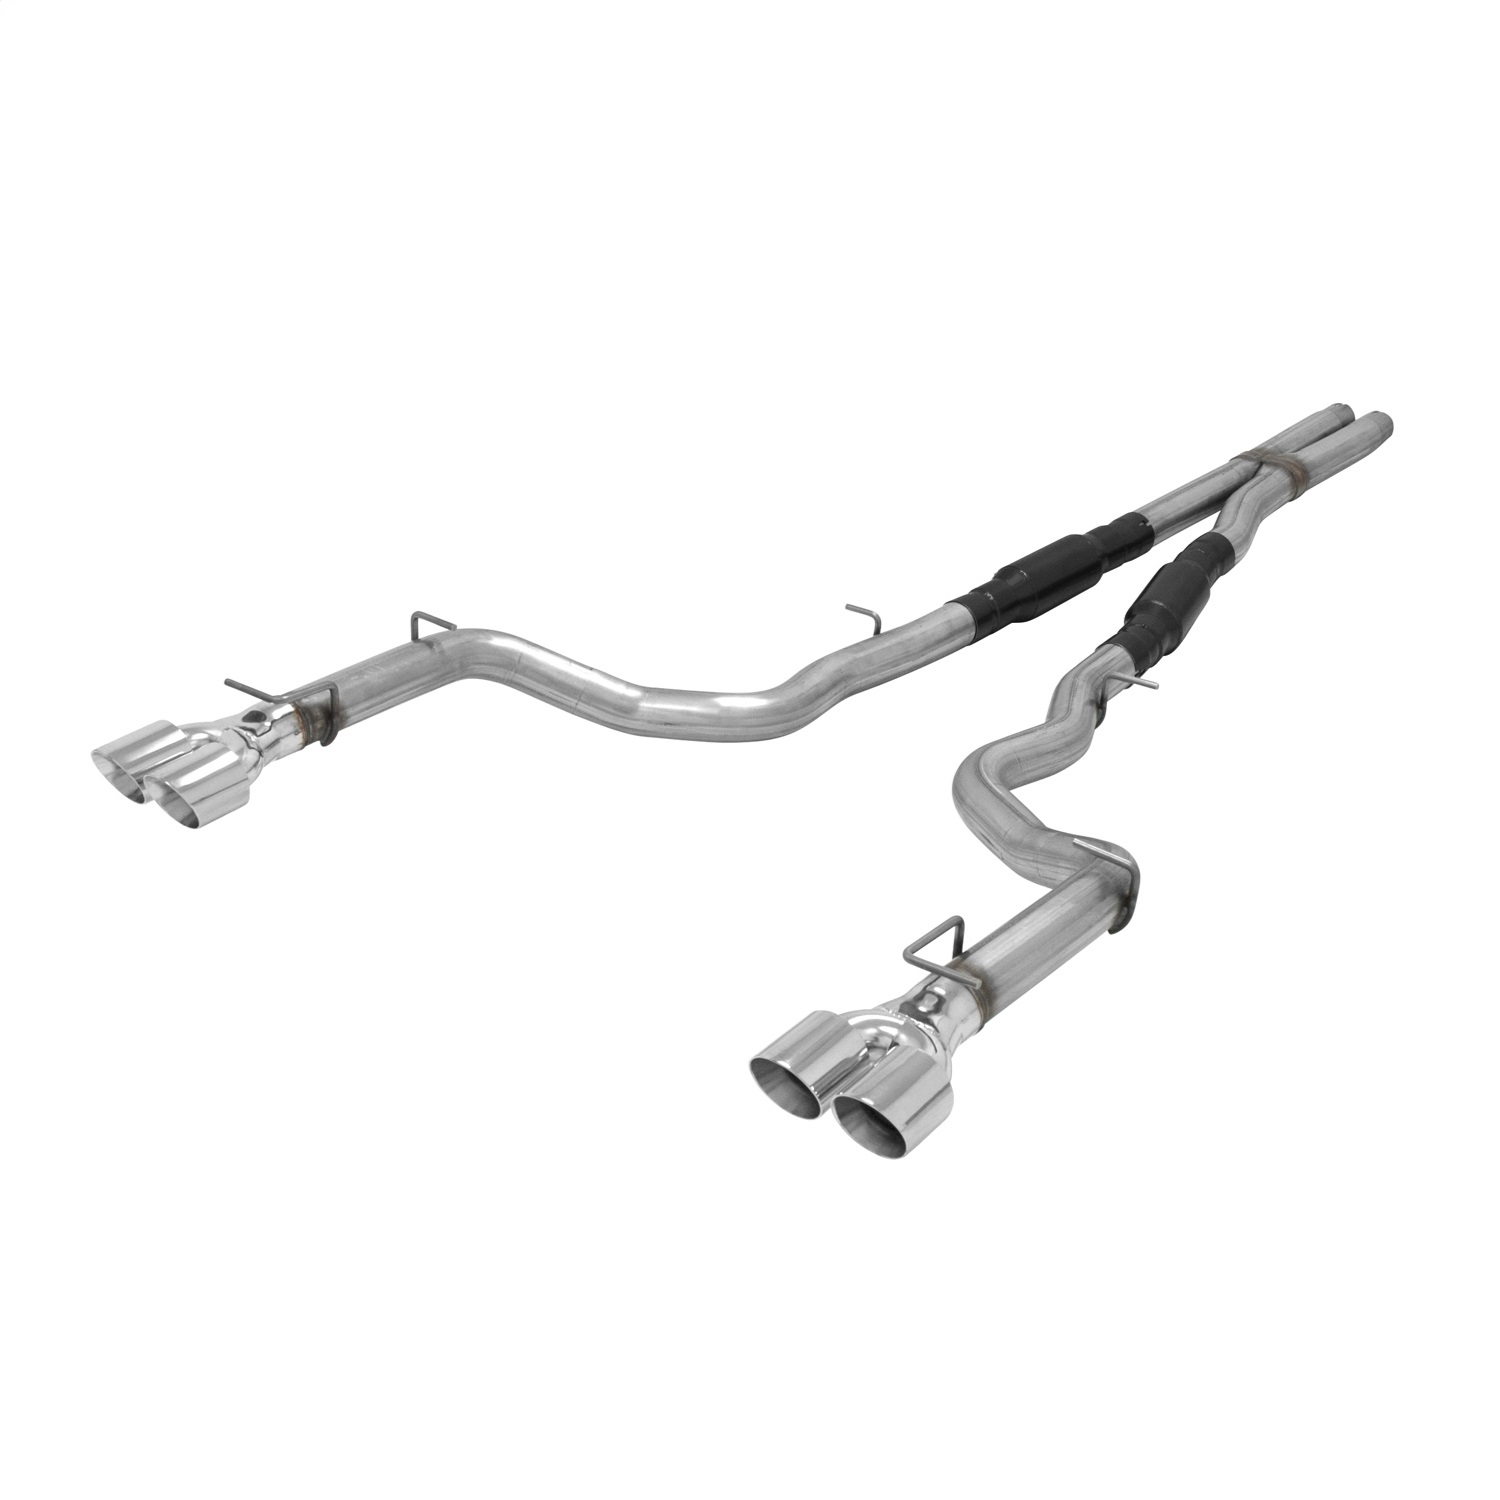 Flowmaster Flowmaster 817717 Outlaw Series Cat Back Exhaust System Fits 15 Challenger